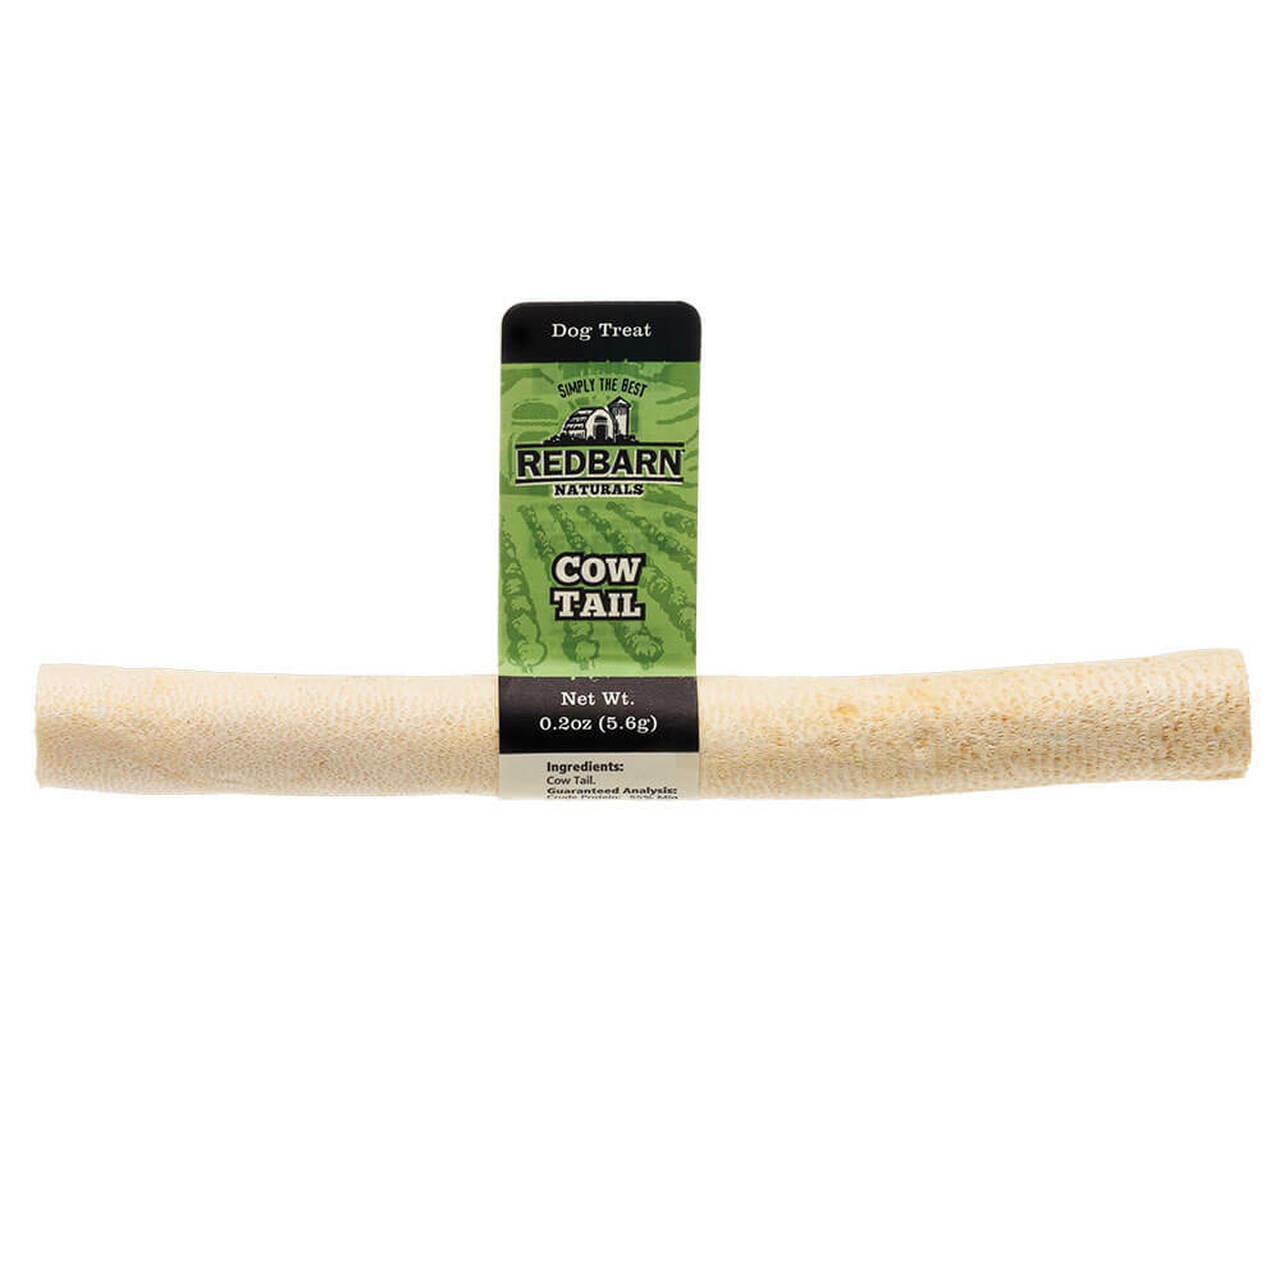 Redbarn Cow Tail Chews For Dogs